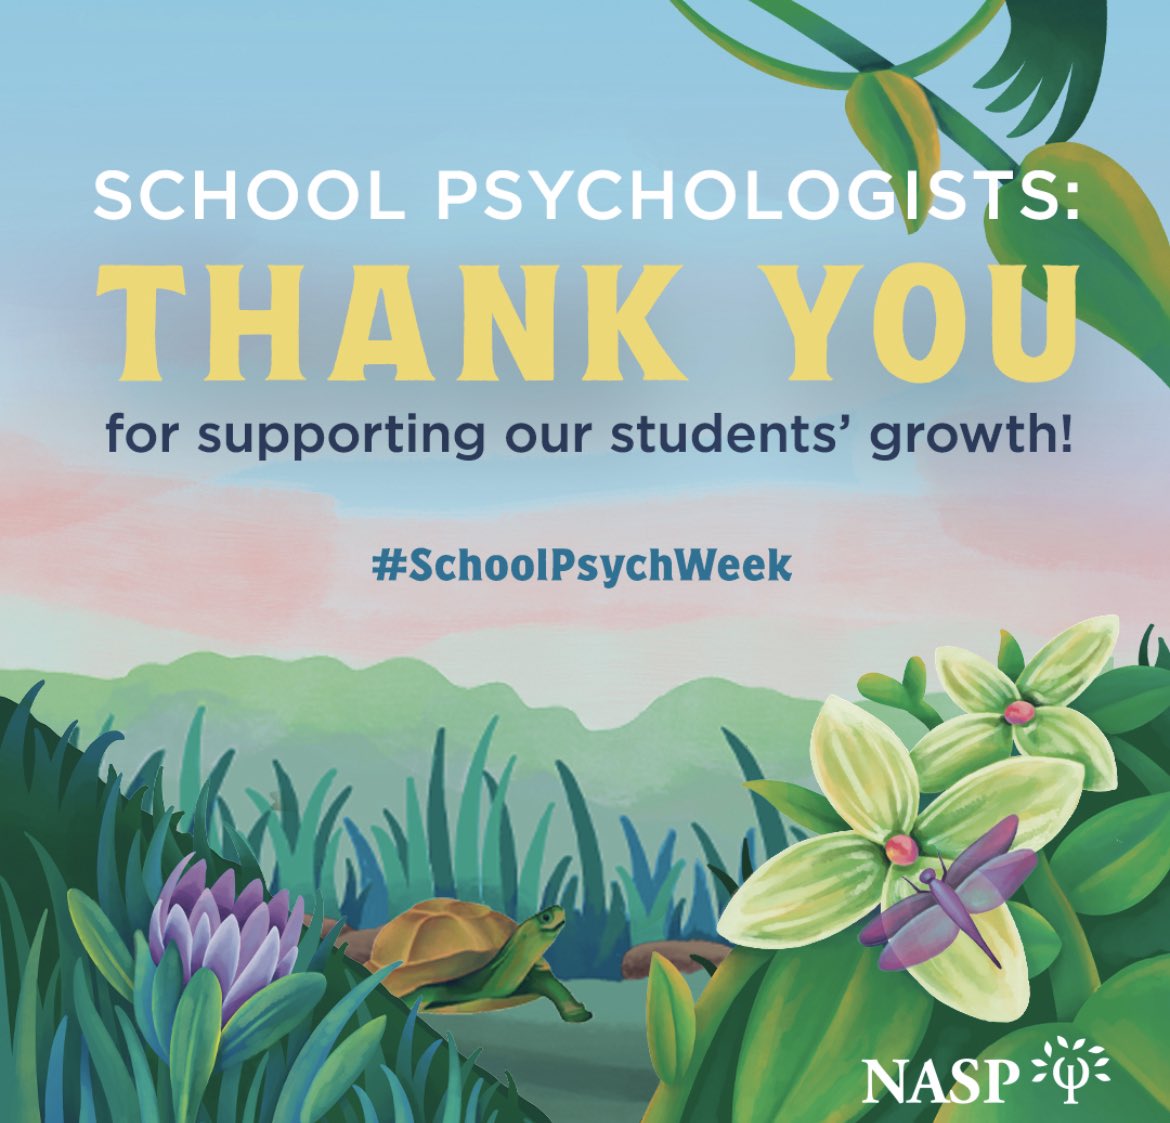 November 6-10th is National School Psychologist Week! We want to extend a heartfelt thank you to our @ChandlerUnified School Psychologists for supporting the well-being of our students so we can continue to grow together as a school community!